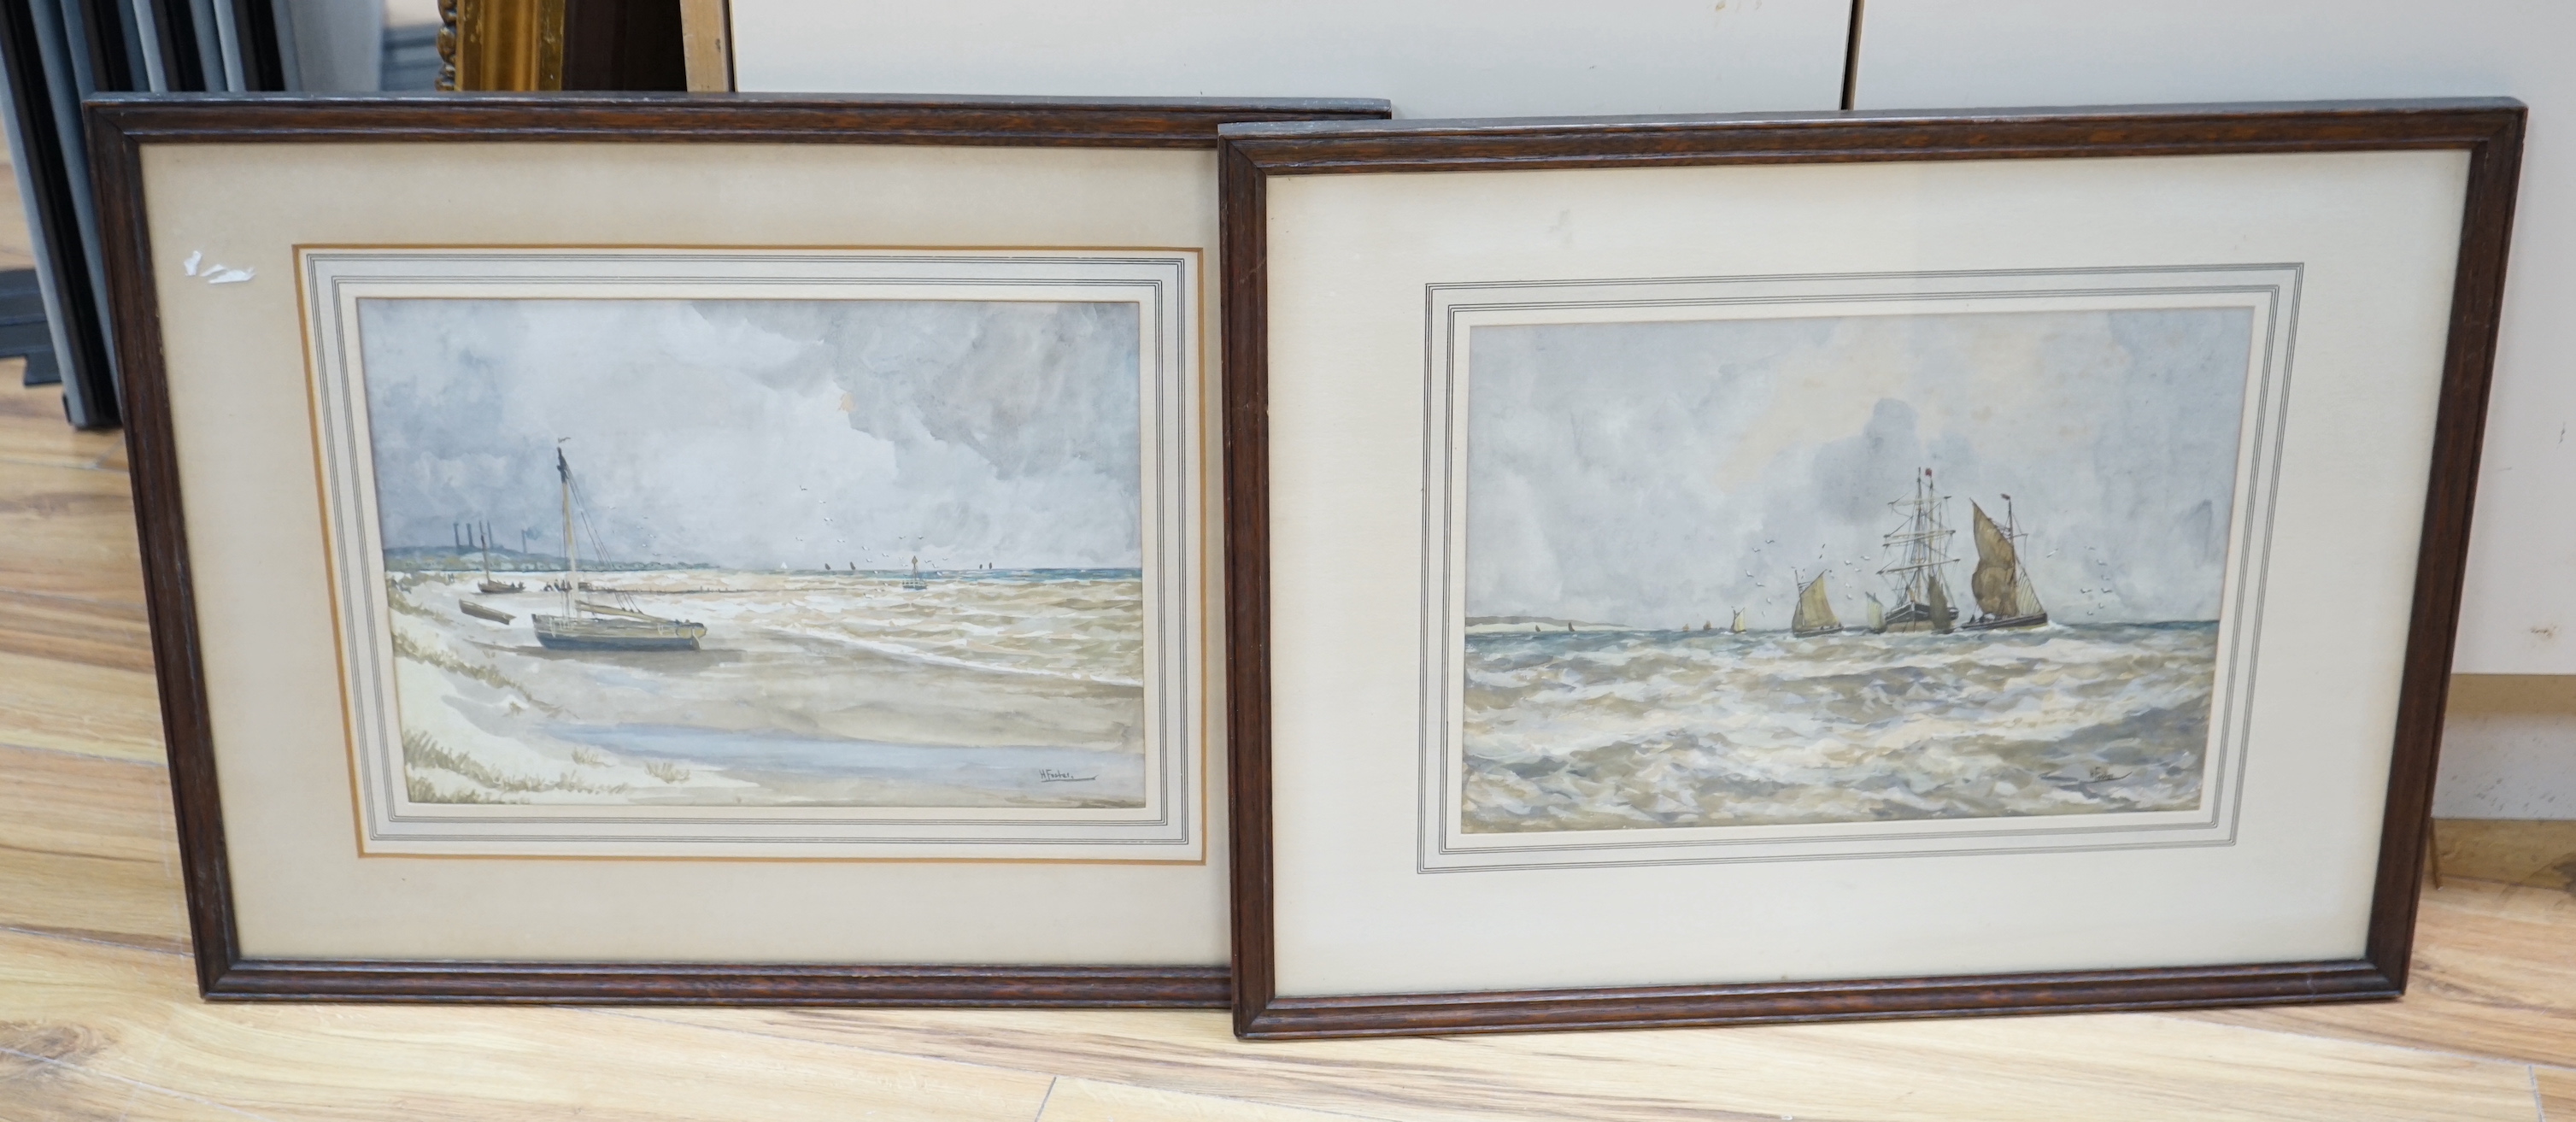 H. Foster (19th/20th. C), pair of Maritime interest watercolours, Marina and ships at sea, each